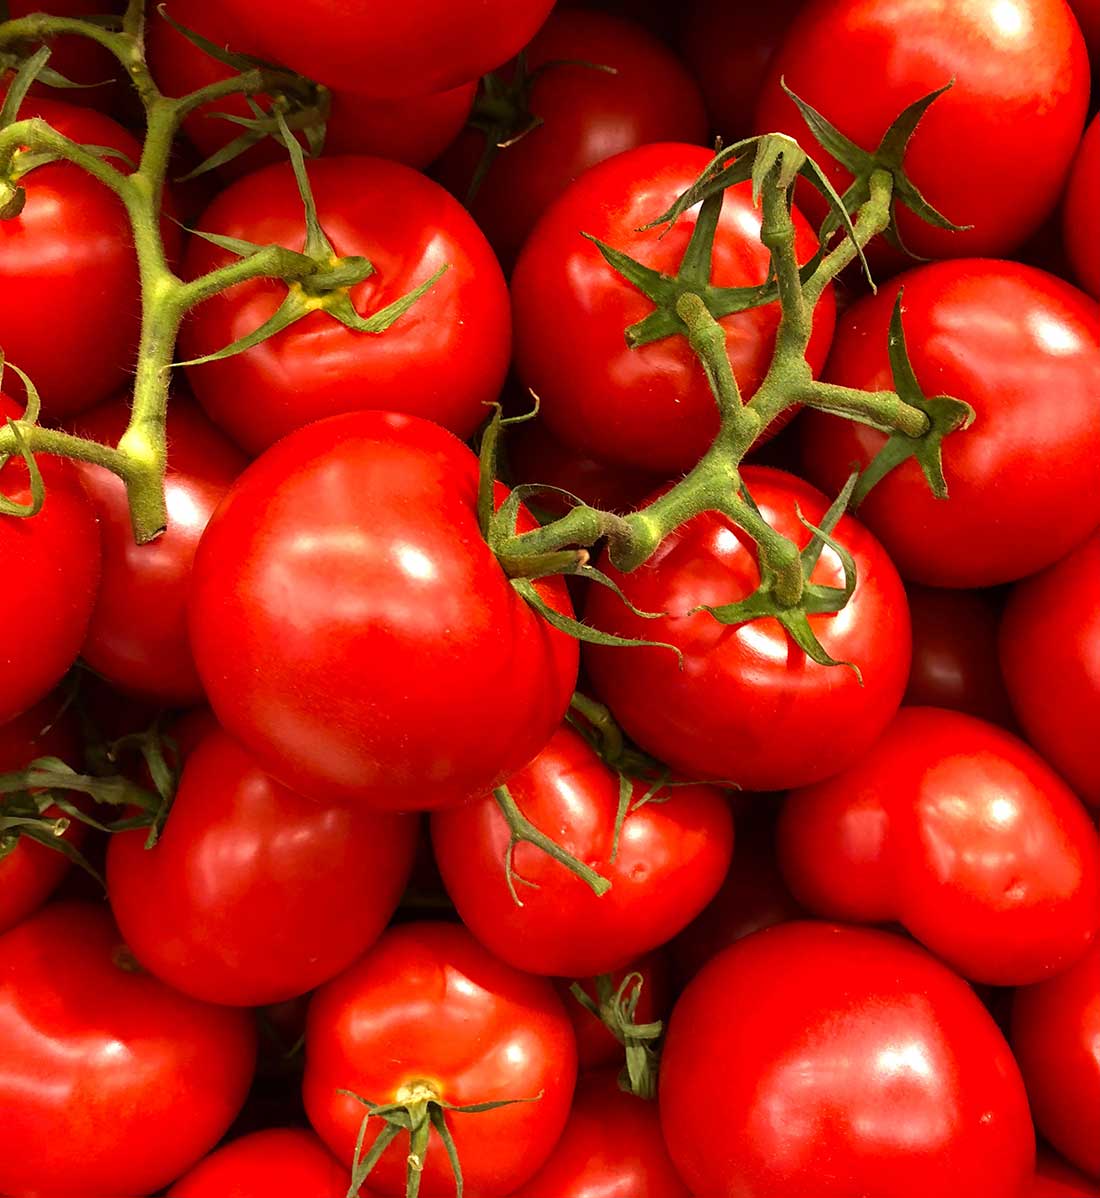 Tomato red russian variety - beef tomato is a very delicious vairety and here is all the information you need https://organicgardeningeek.com